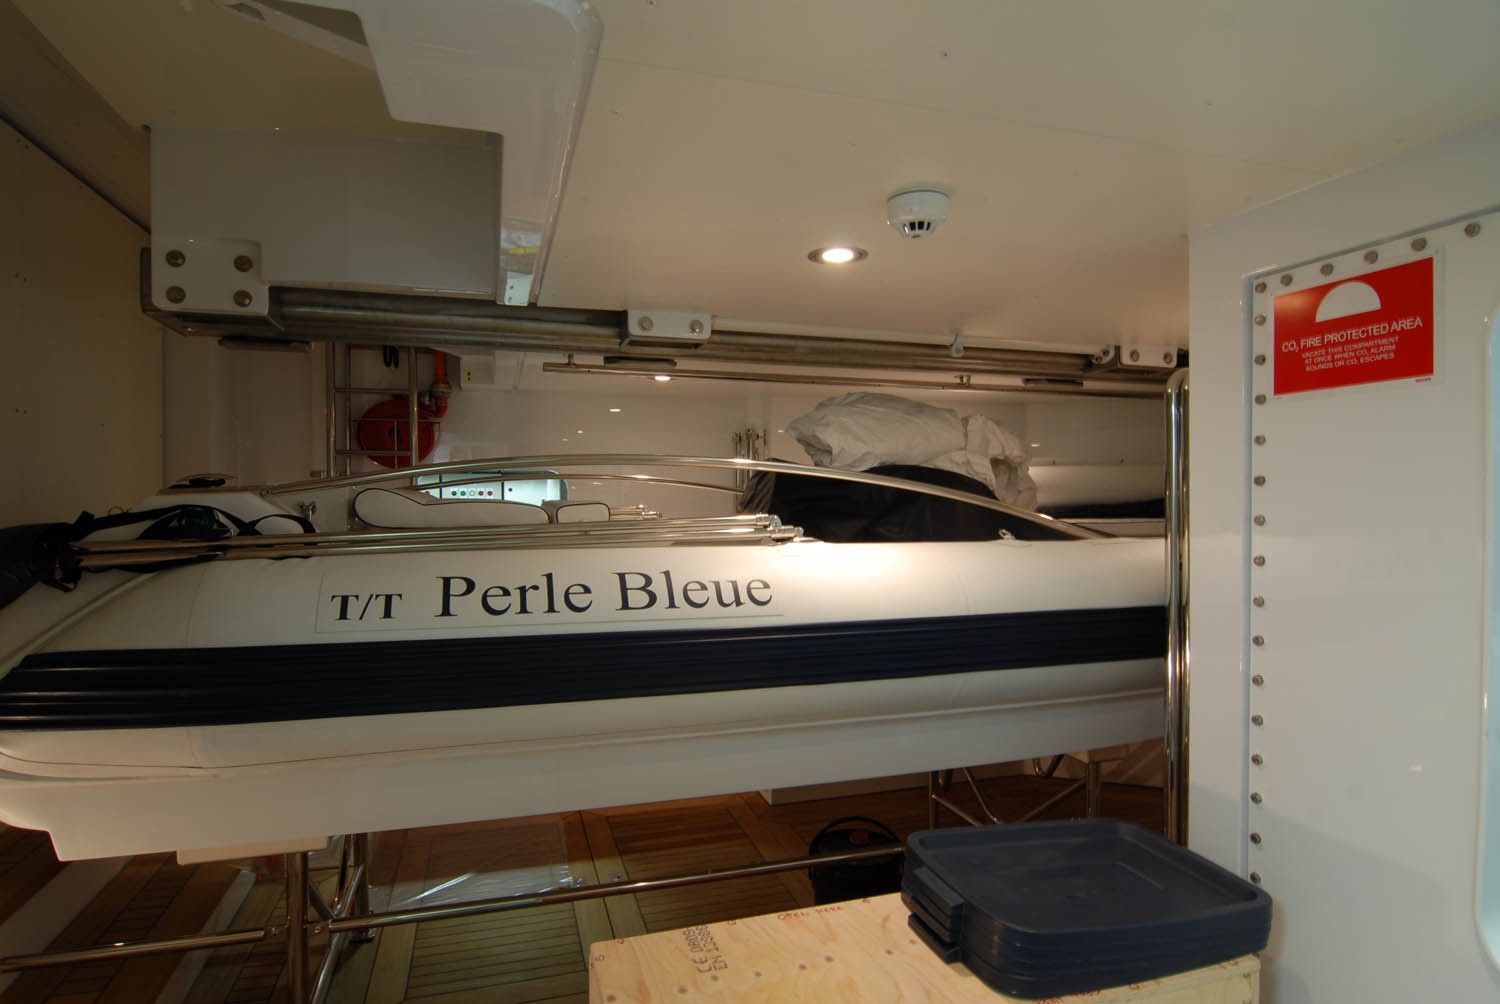 The 37m Yacht PERLE BLEUE